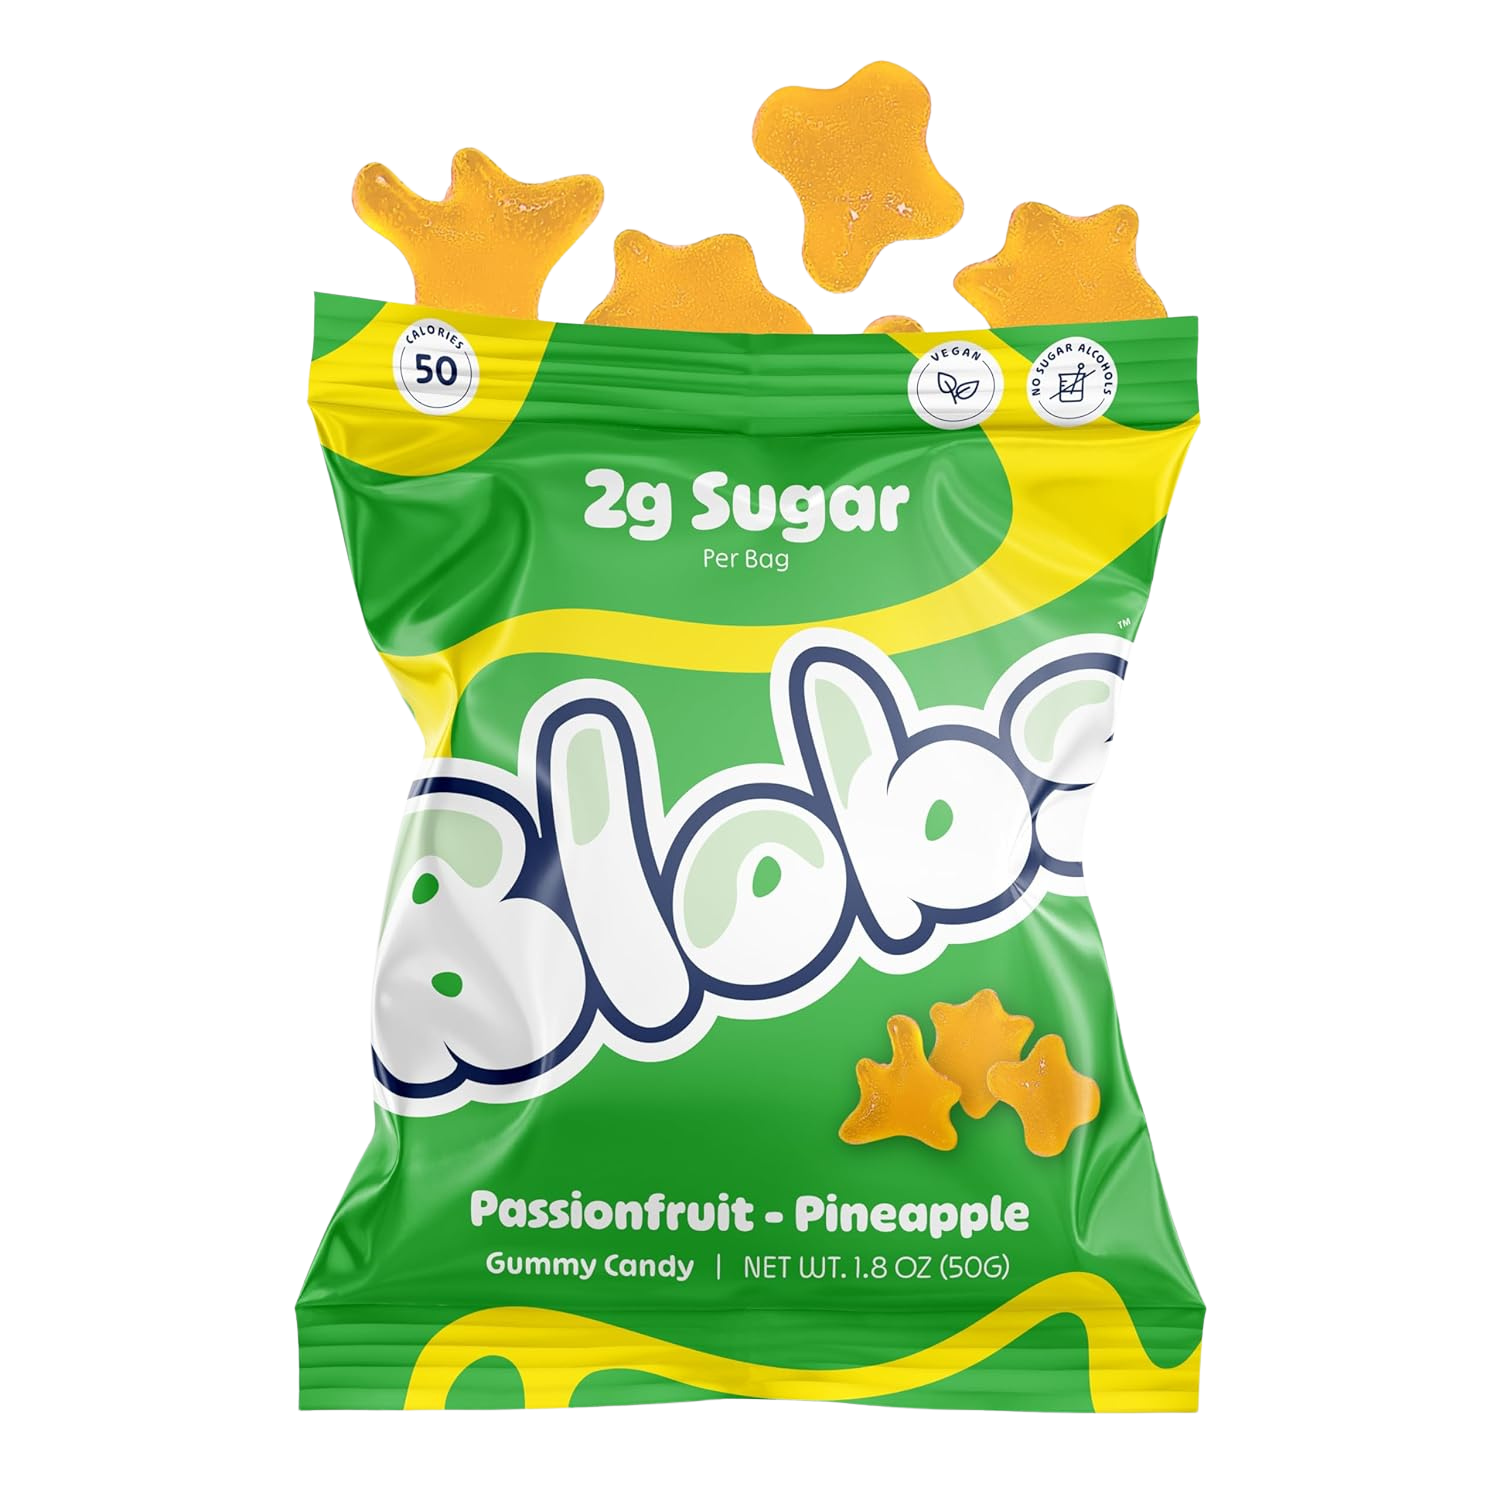 Blobs Passionfruit-Pineapple